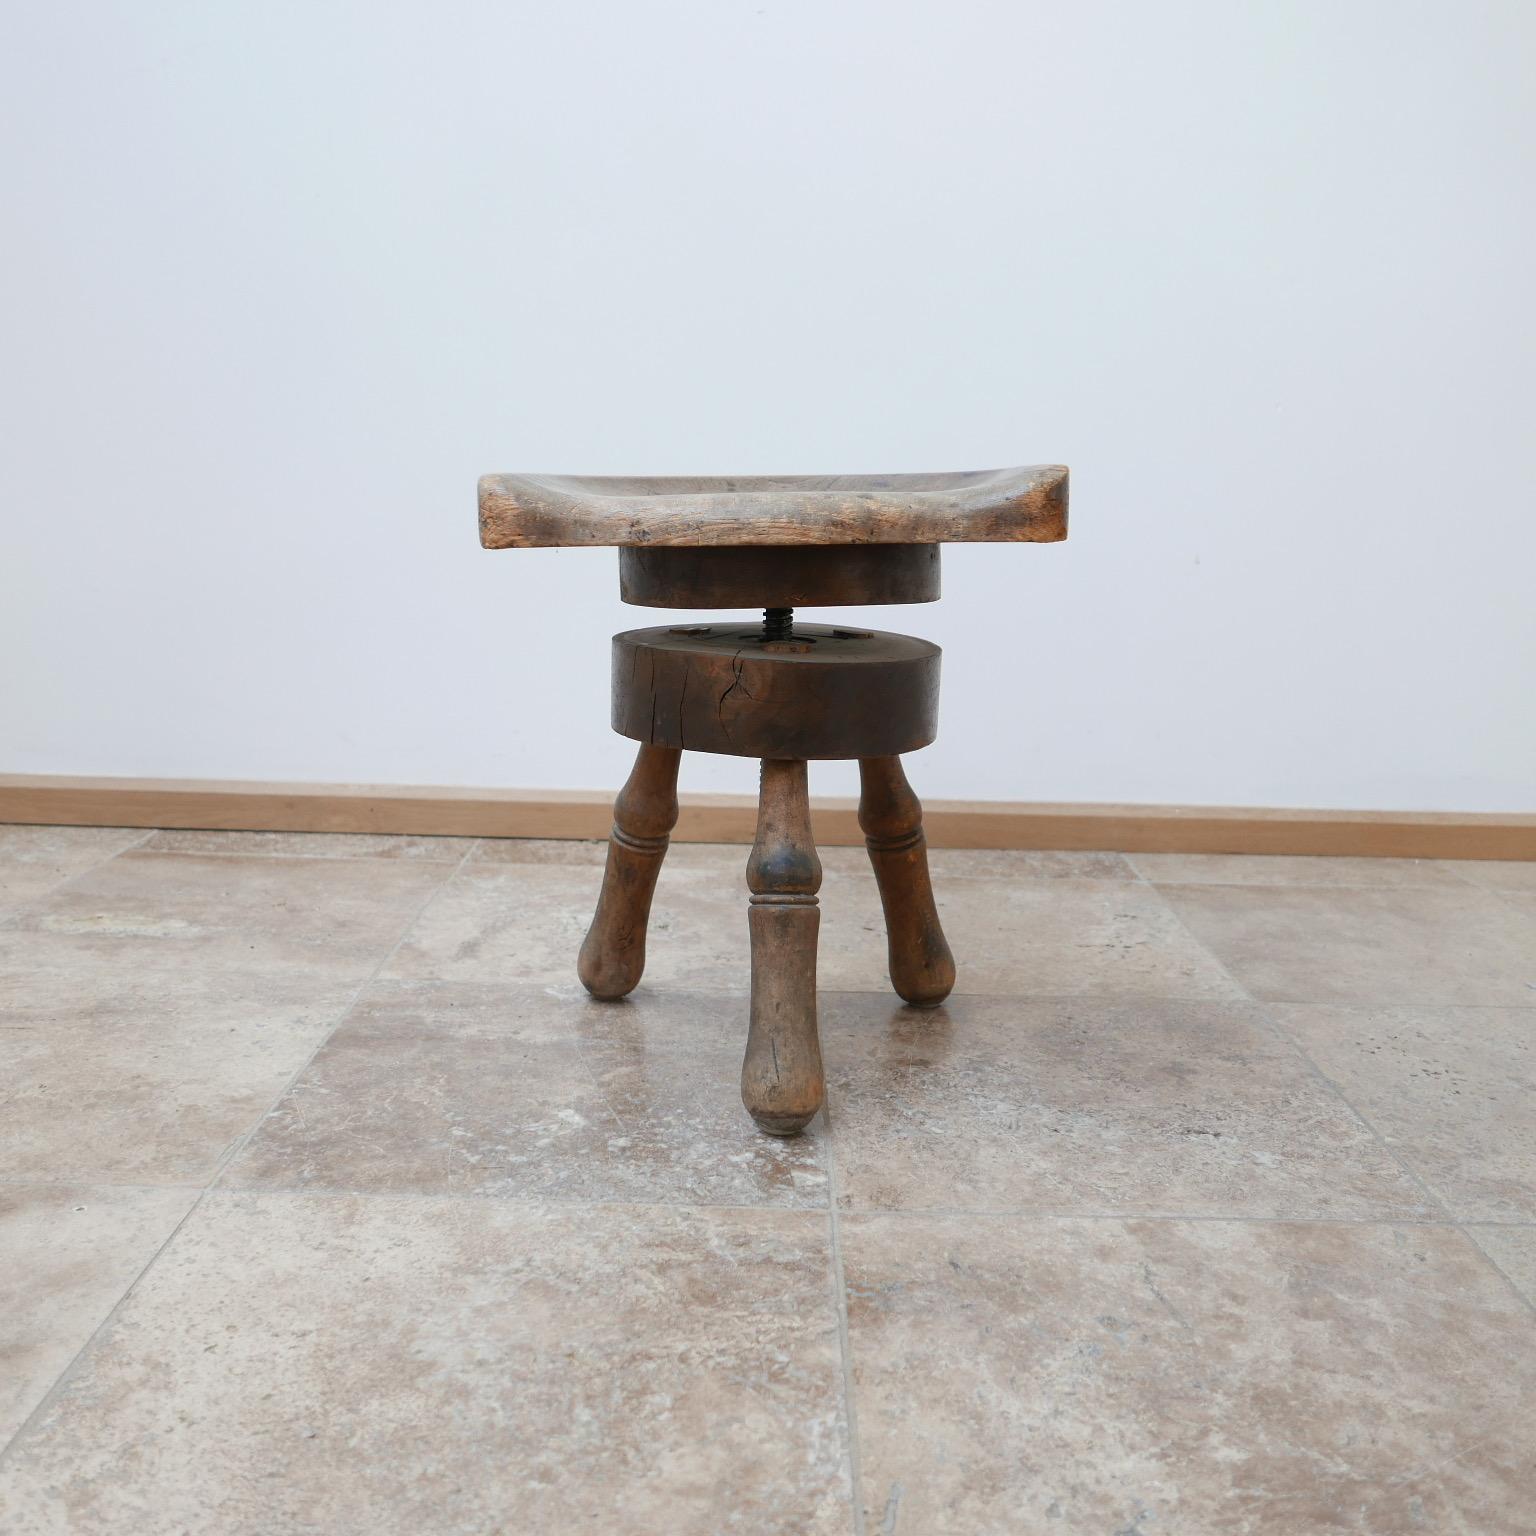 An early 20th century stool, adjustable in height.

A carved seat raised over three legs.

Adjustable by a turned metal pole rises and lowers the seat.

Raises from 42 H to 48 H in cm but can get slightly wobbly at the zenith.

Dimensions: